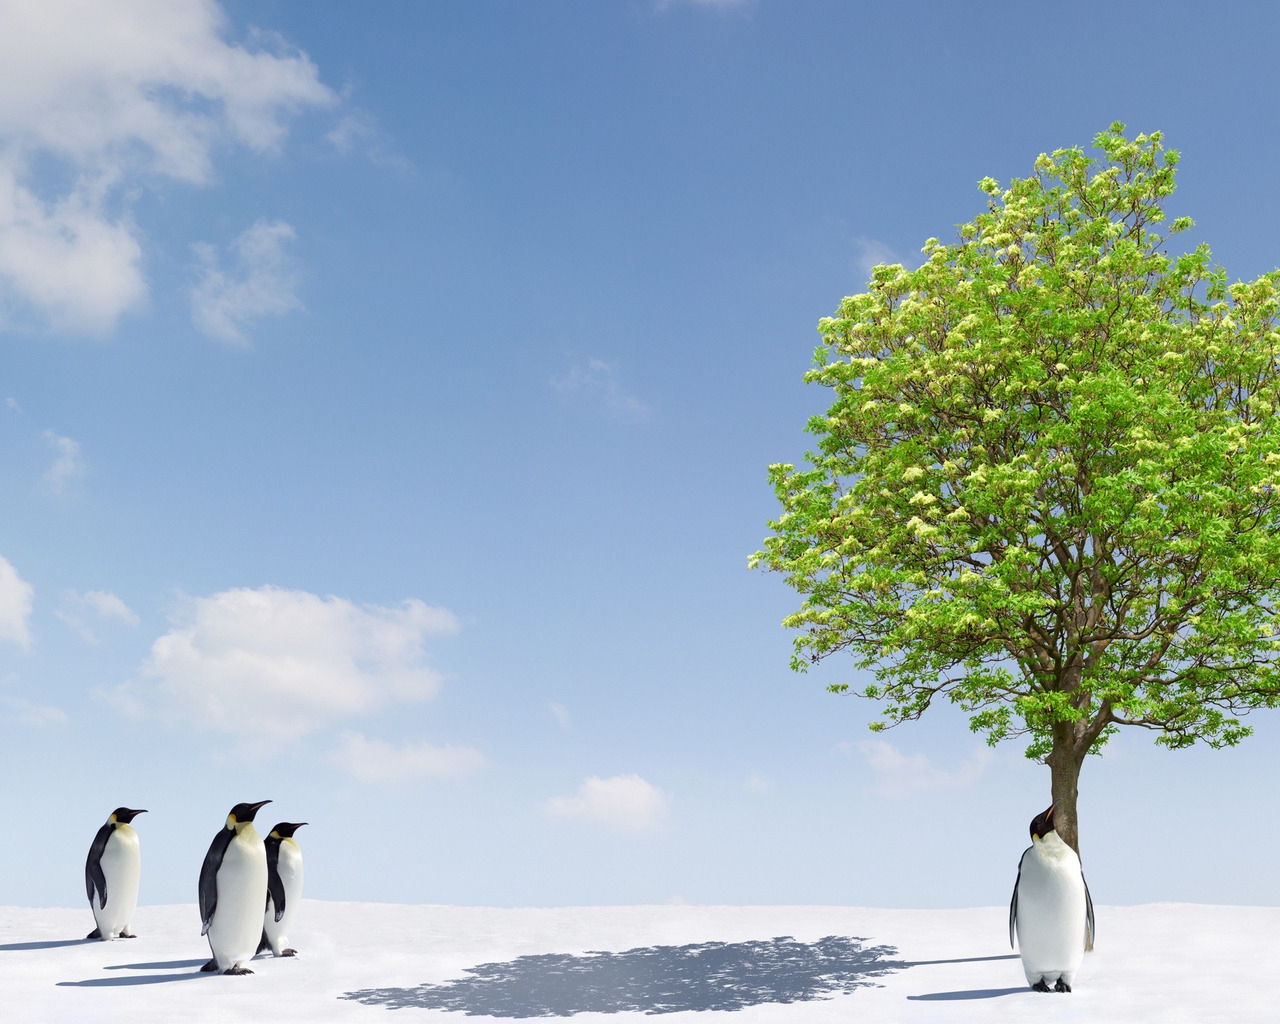 Penguins and Green Tree for 1280 x 1024 resolution